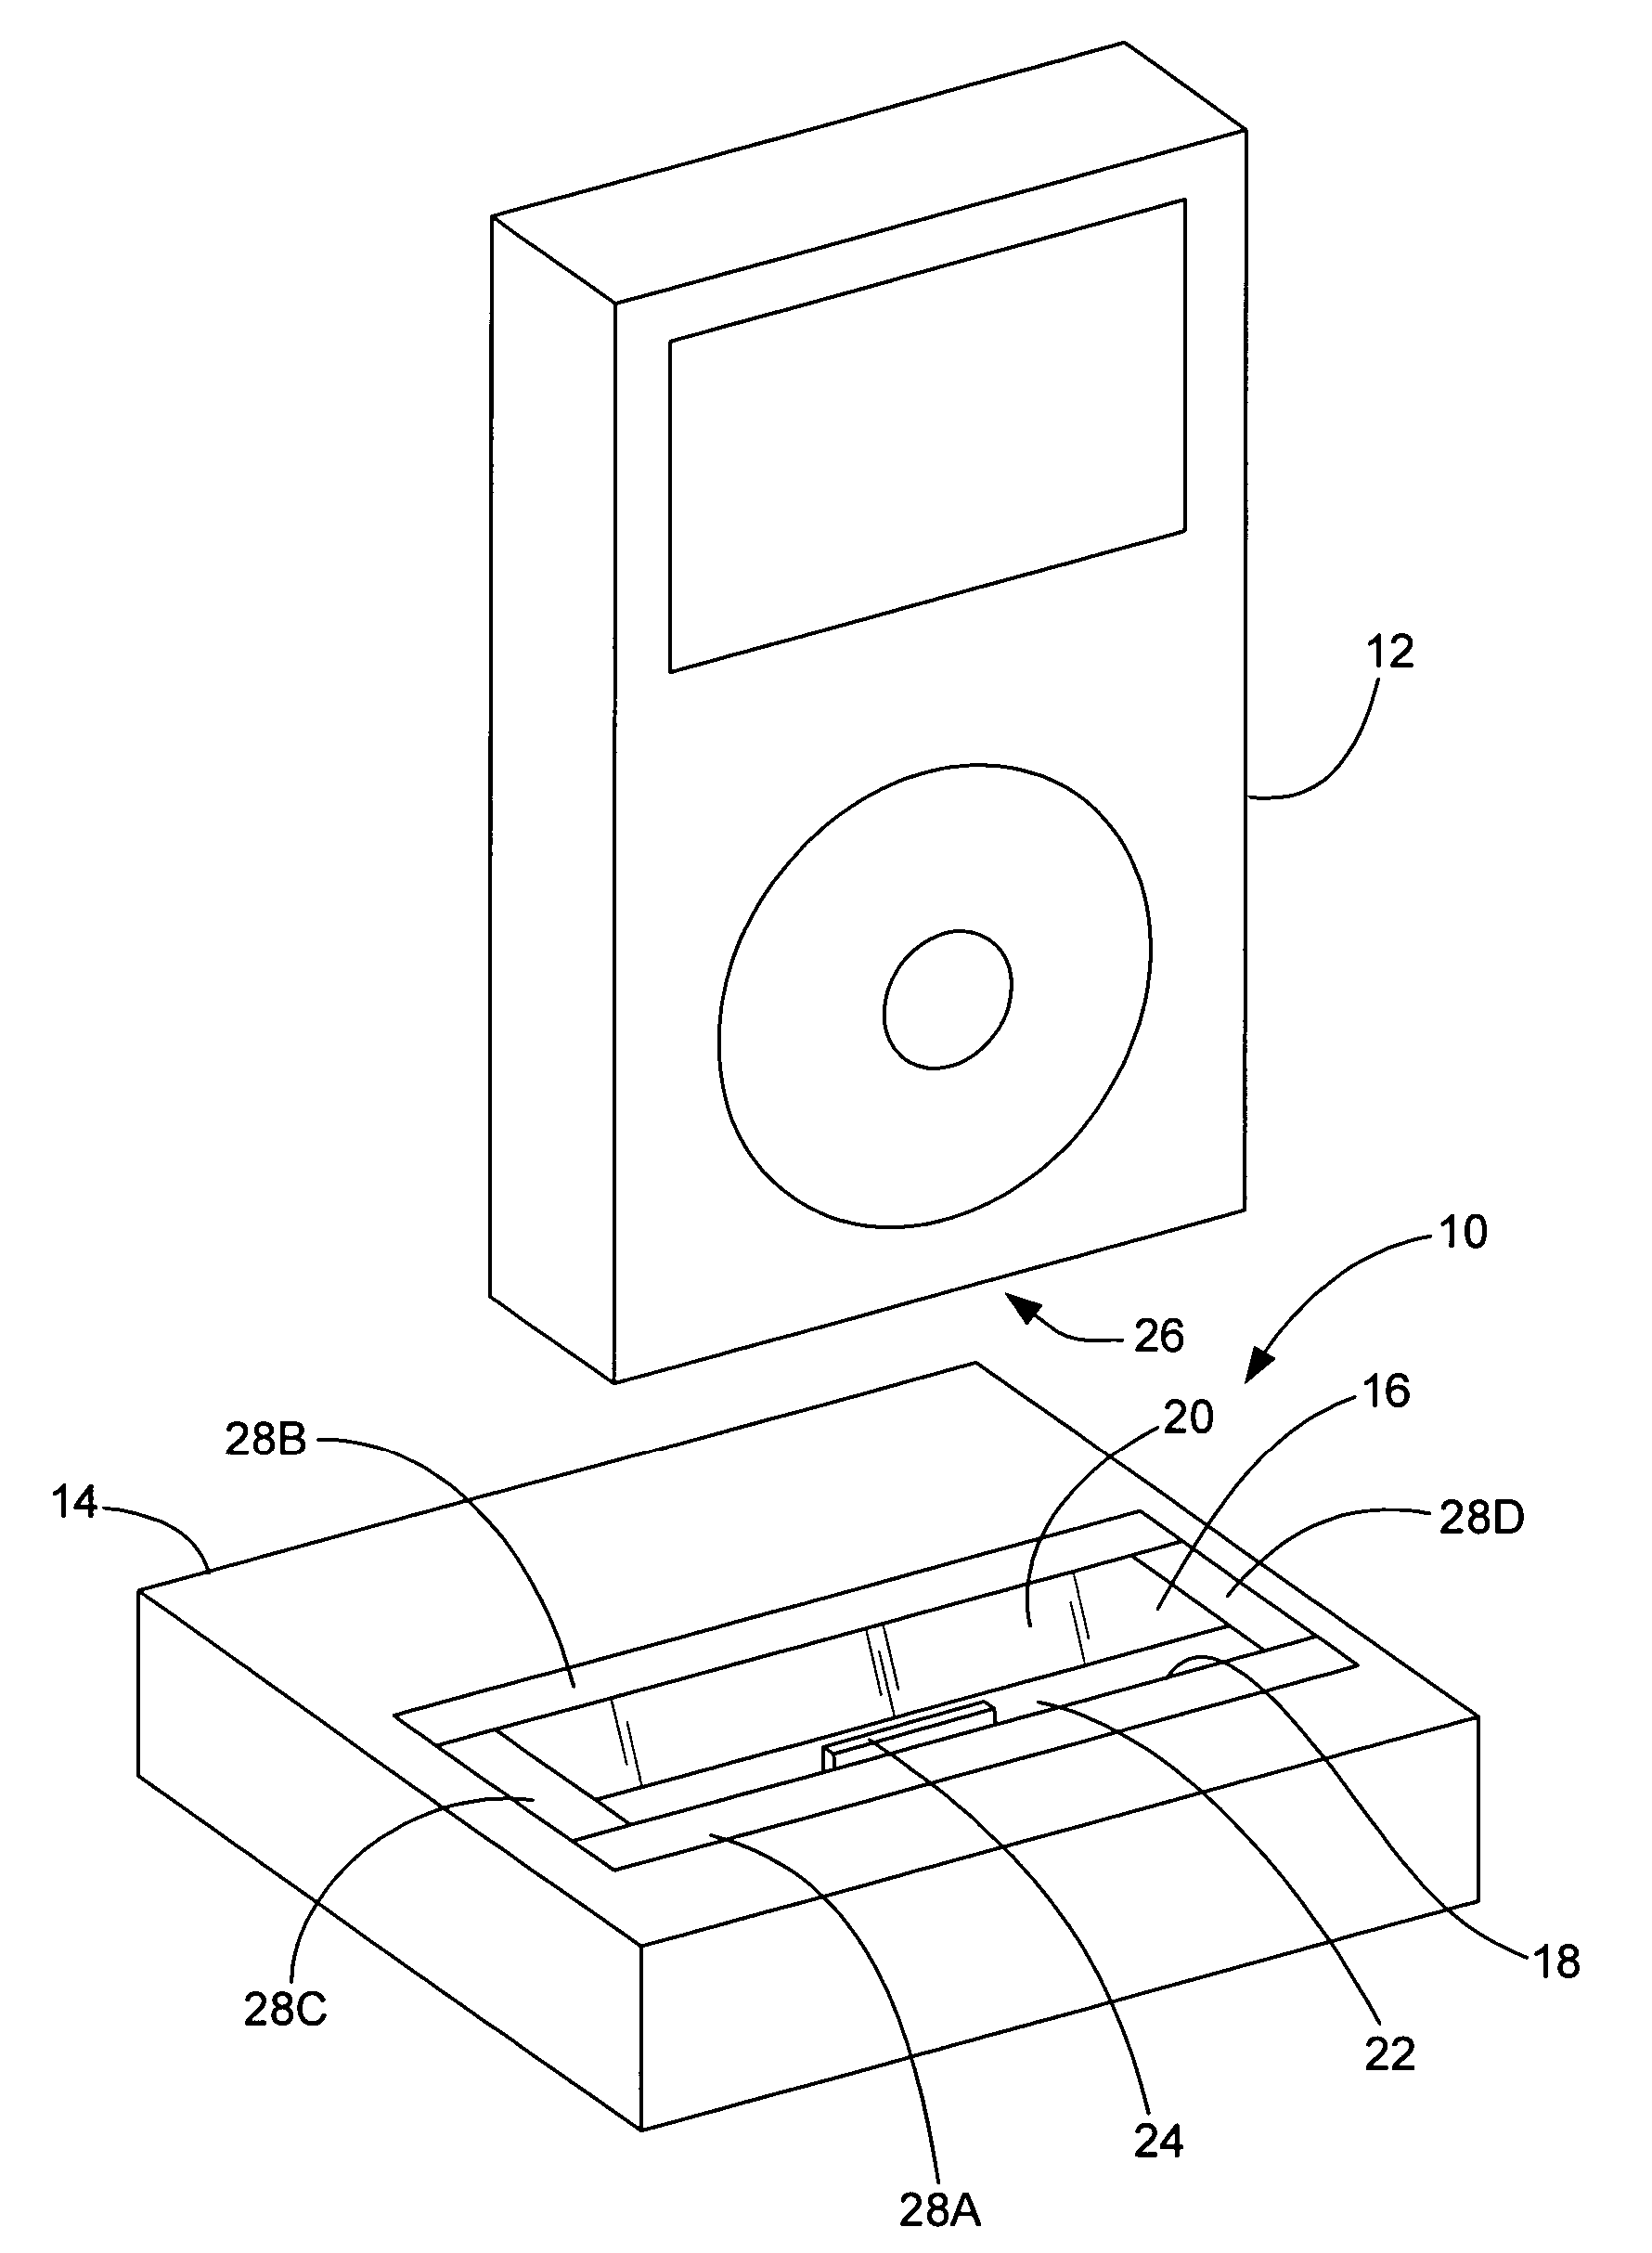 Universal docking station for hand held electronic devices